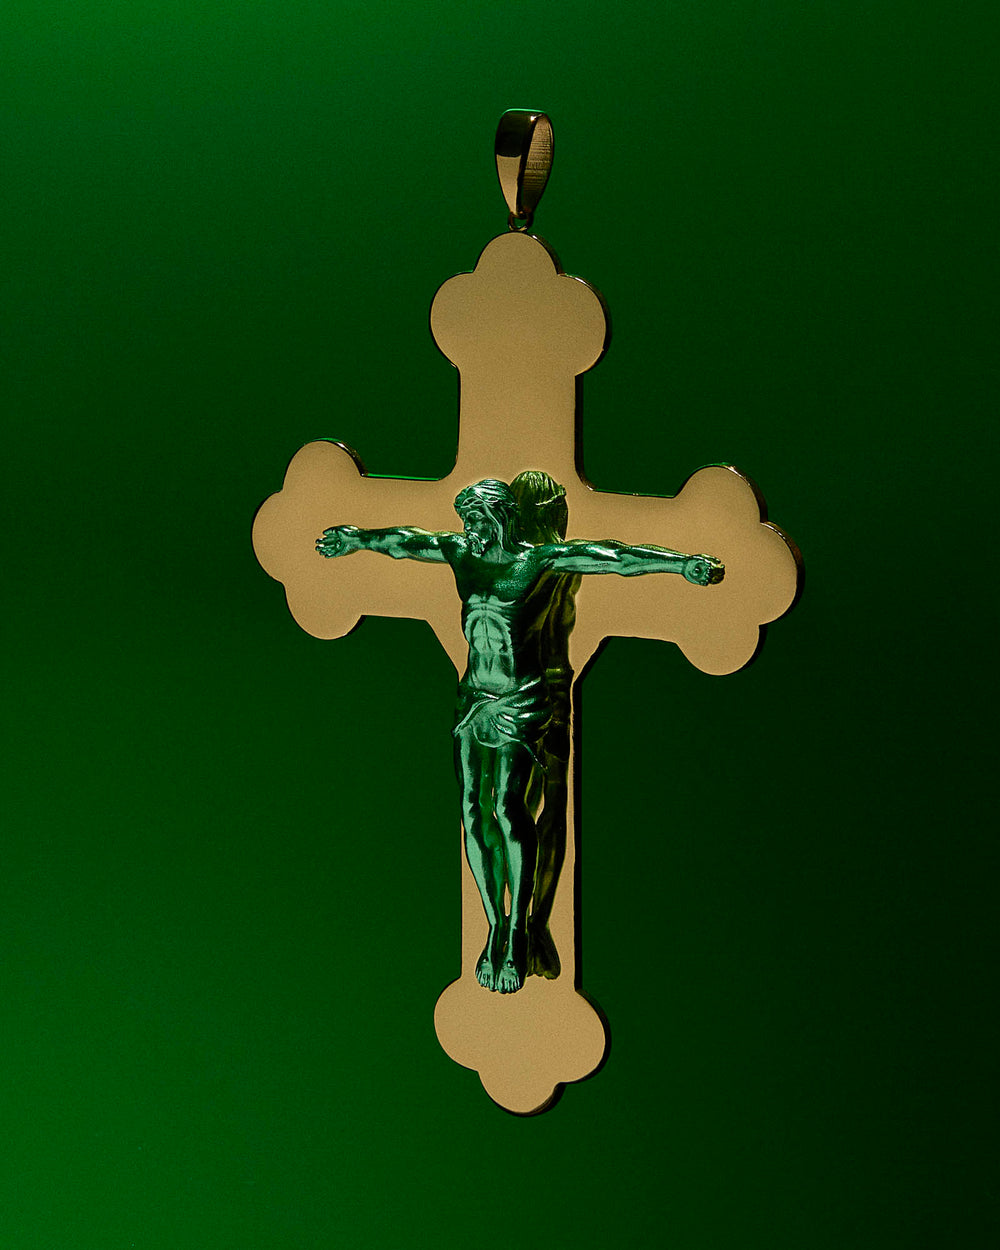 The XL Jesus Piece in Yellow Gold